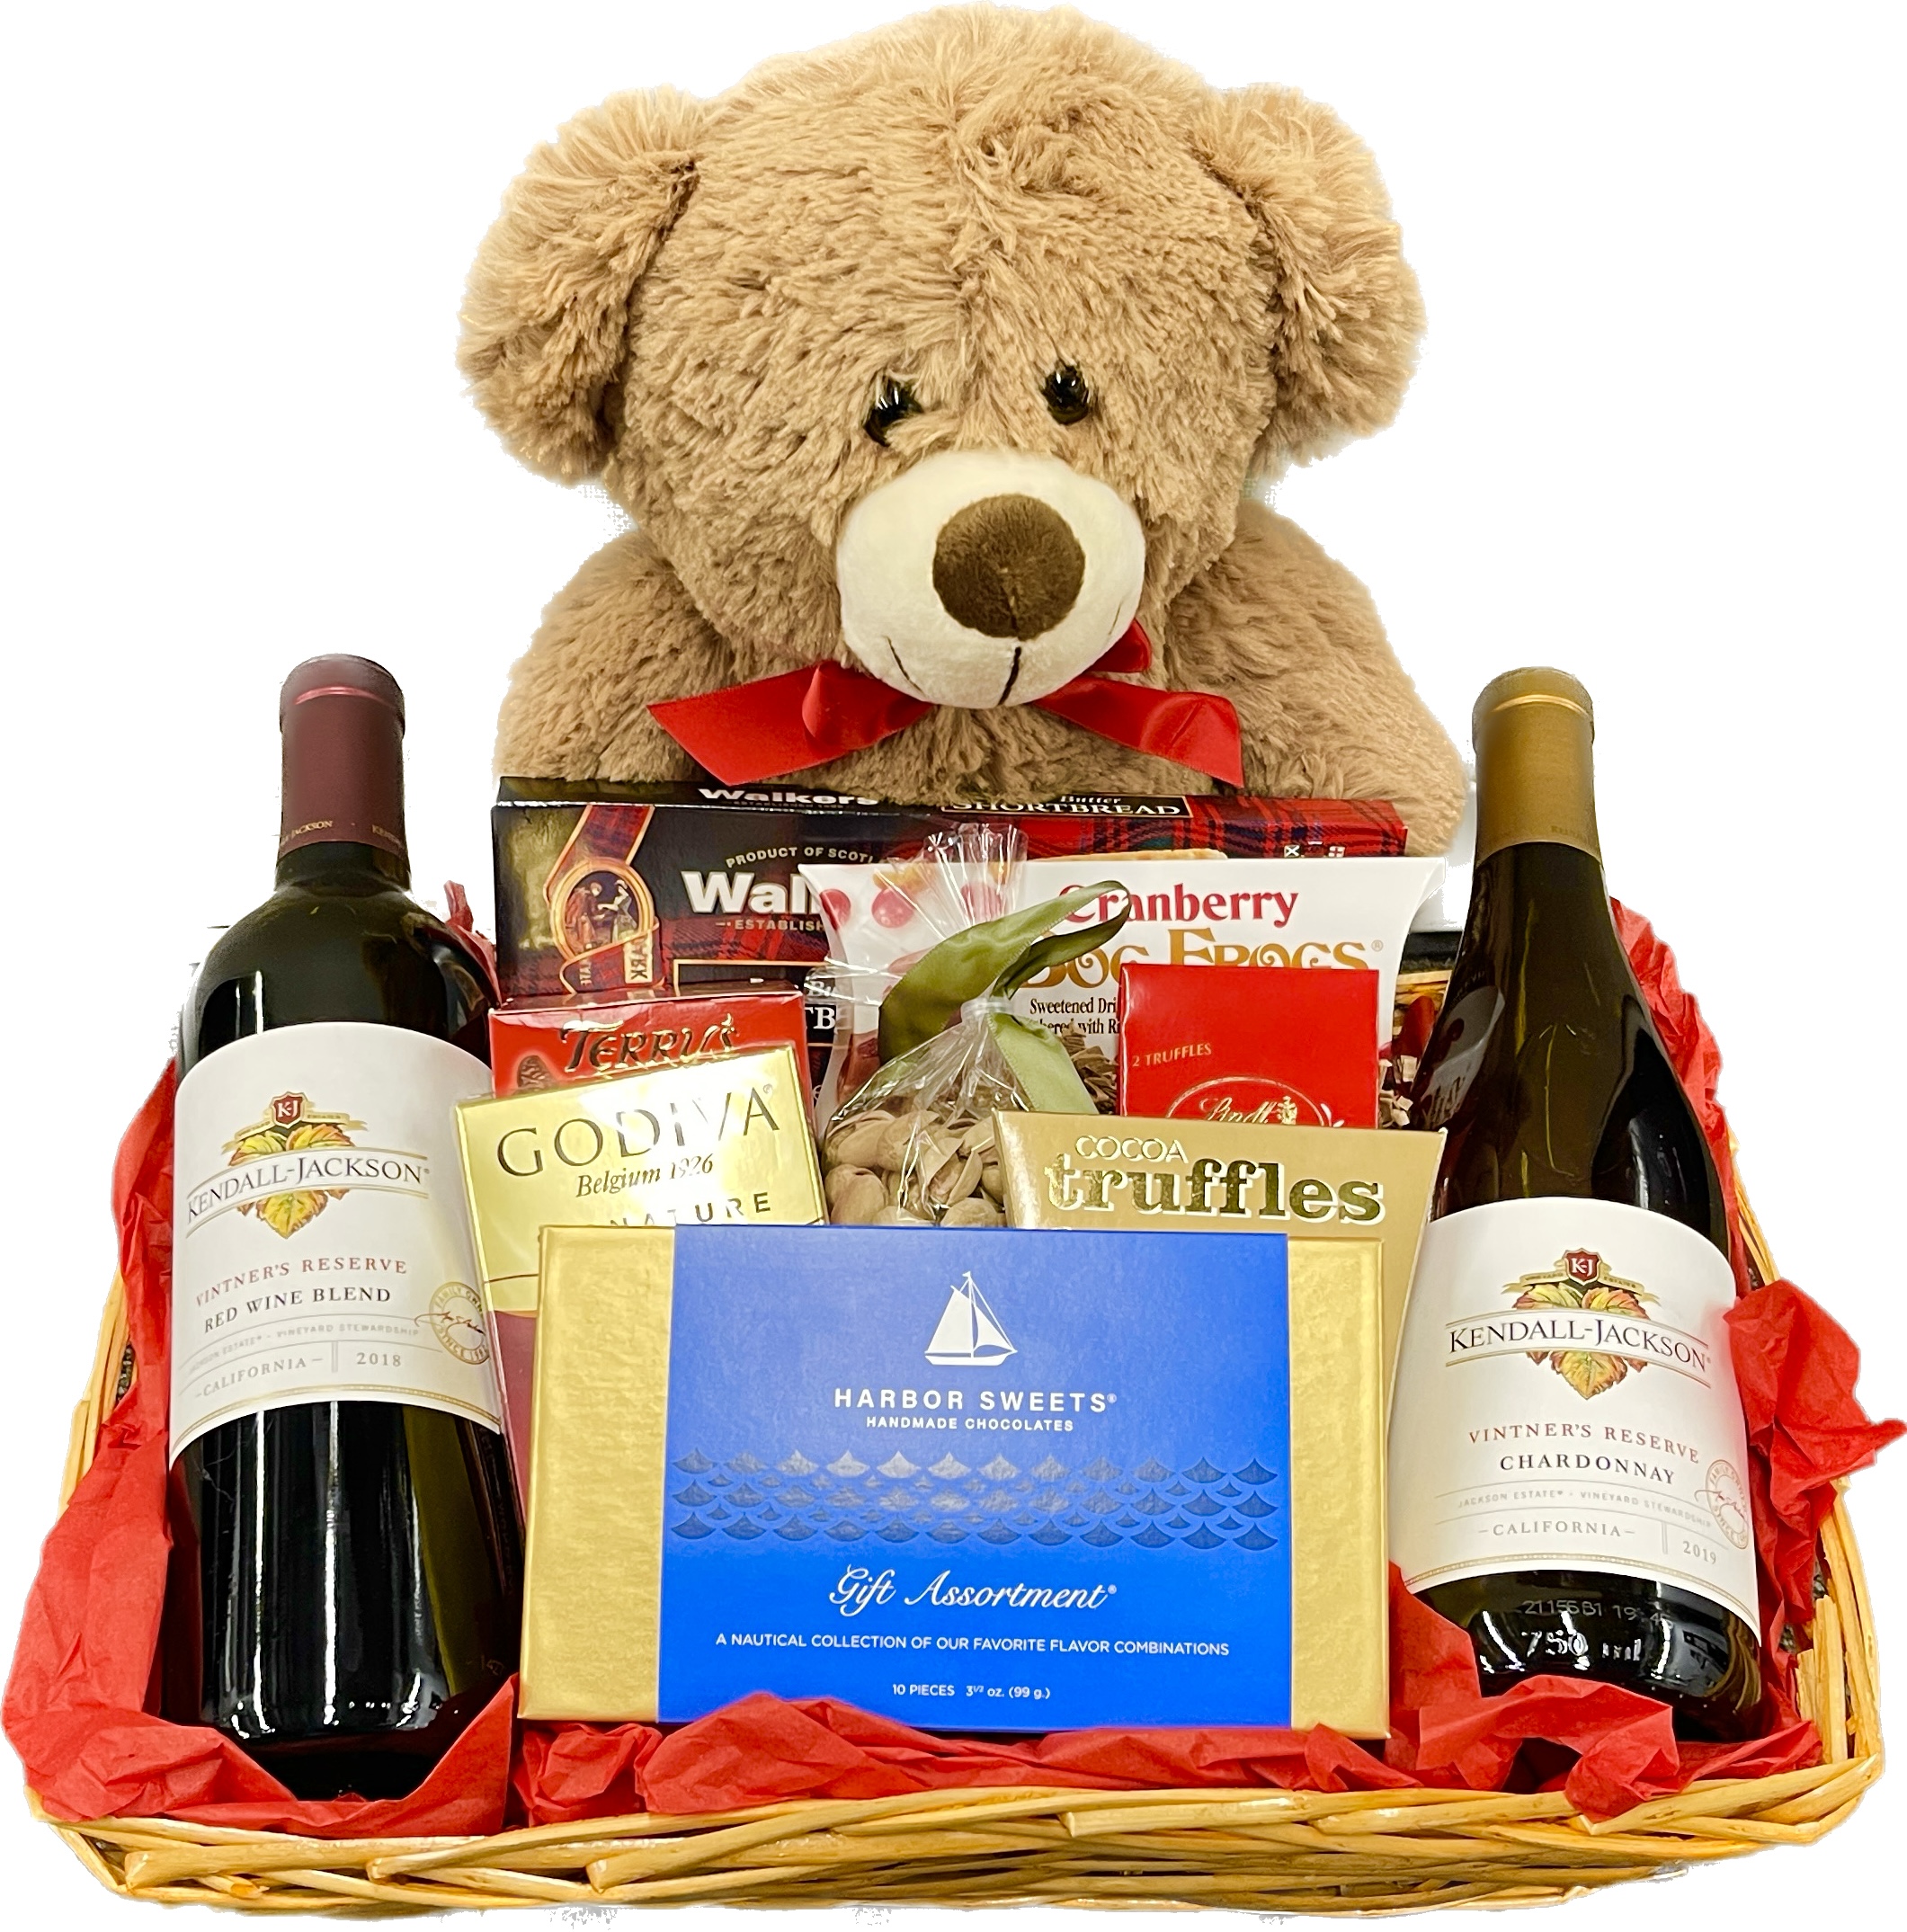 Sweetheart Basket with Brown Teddy